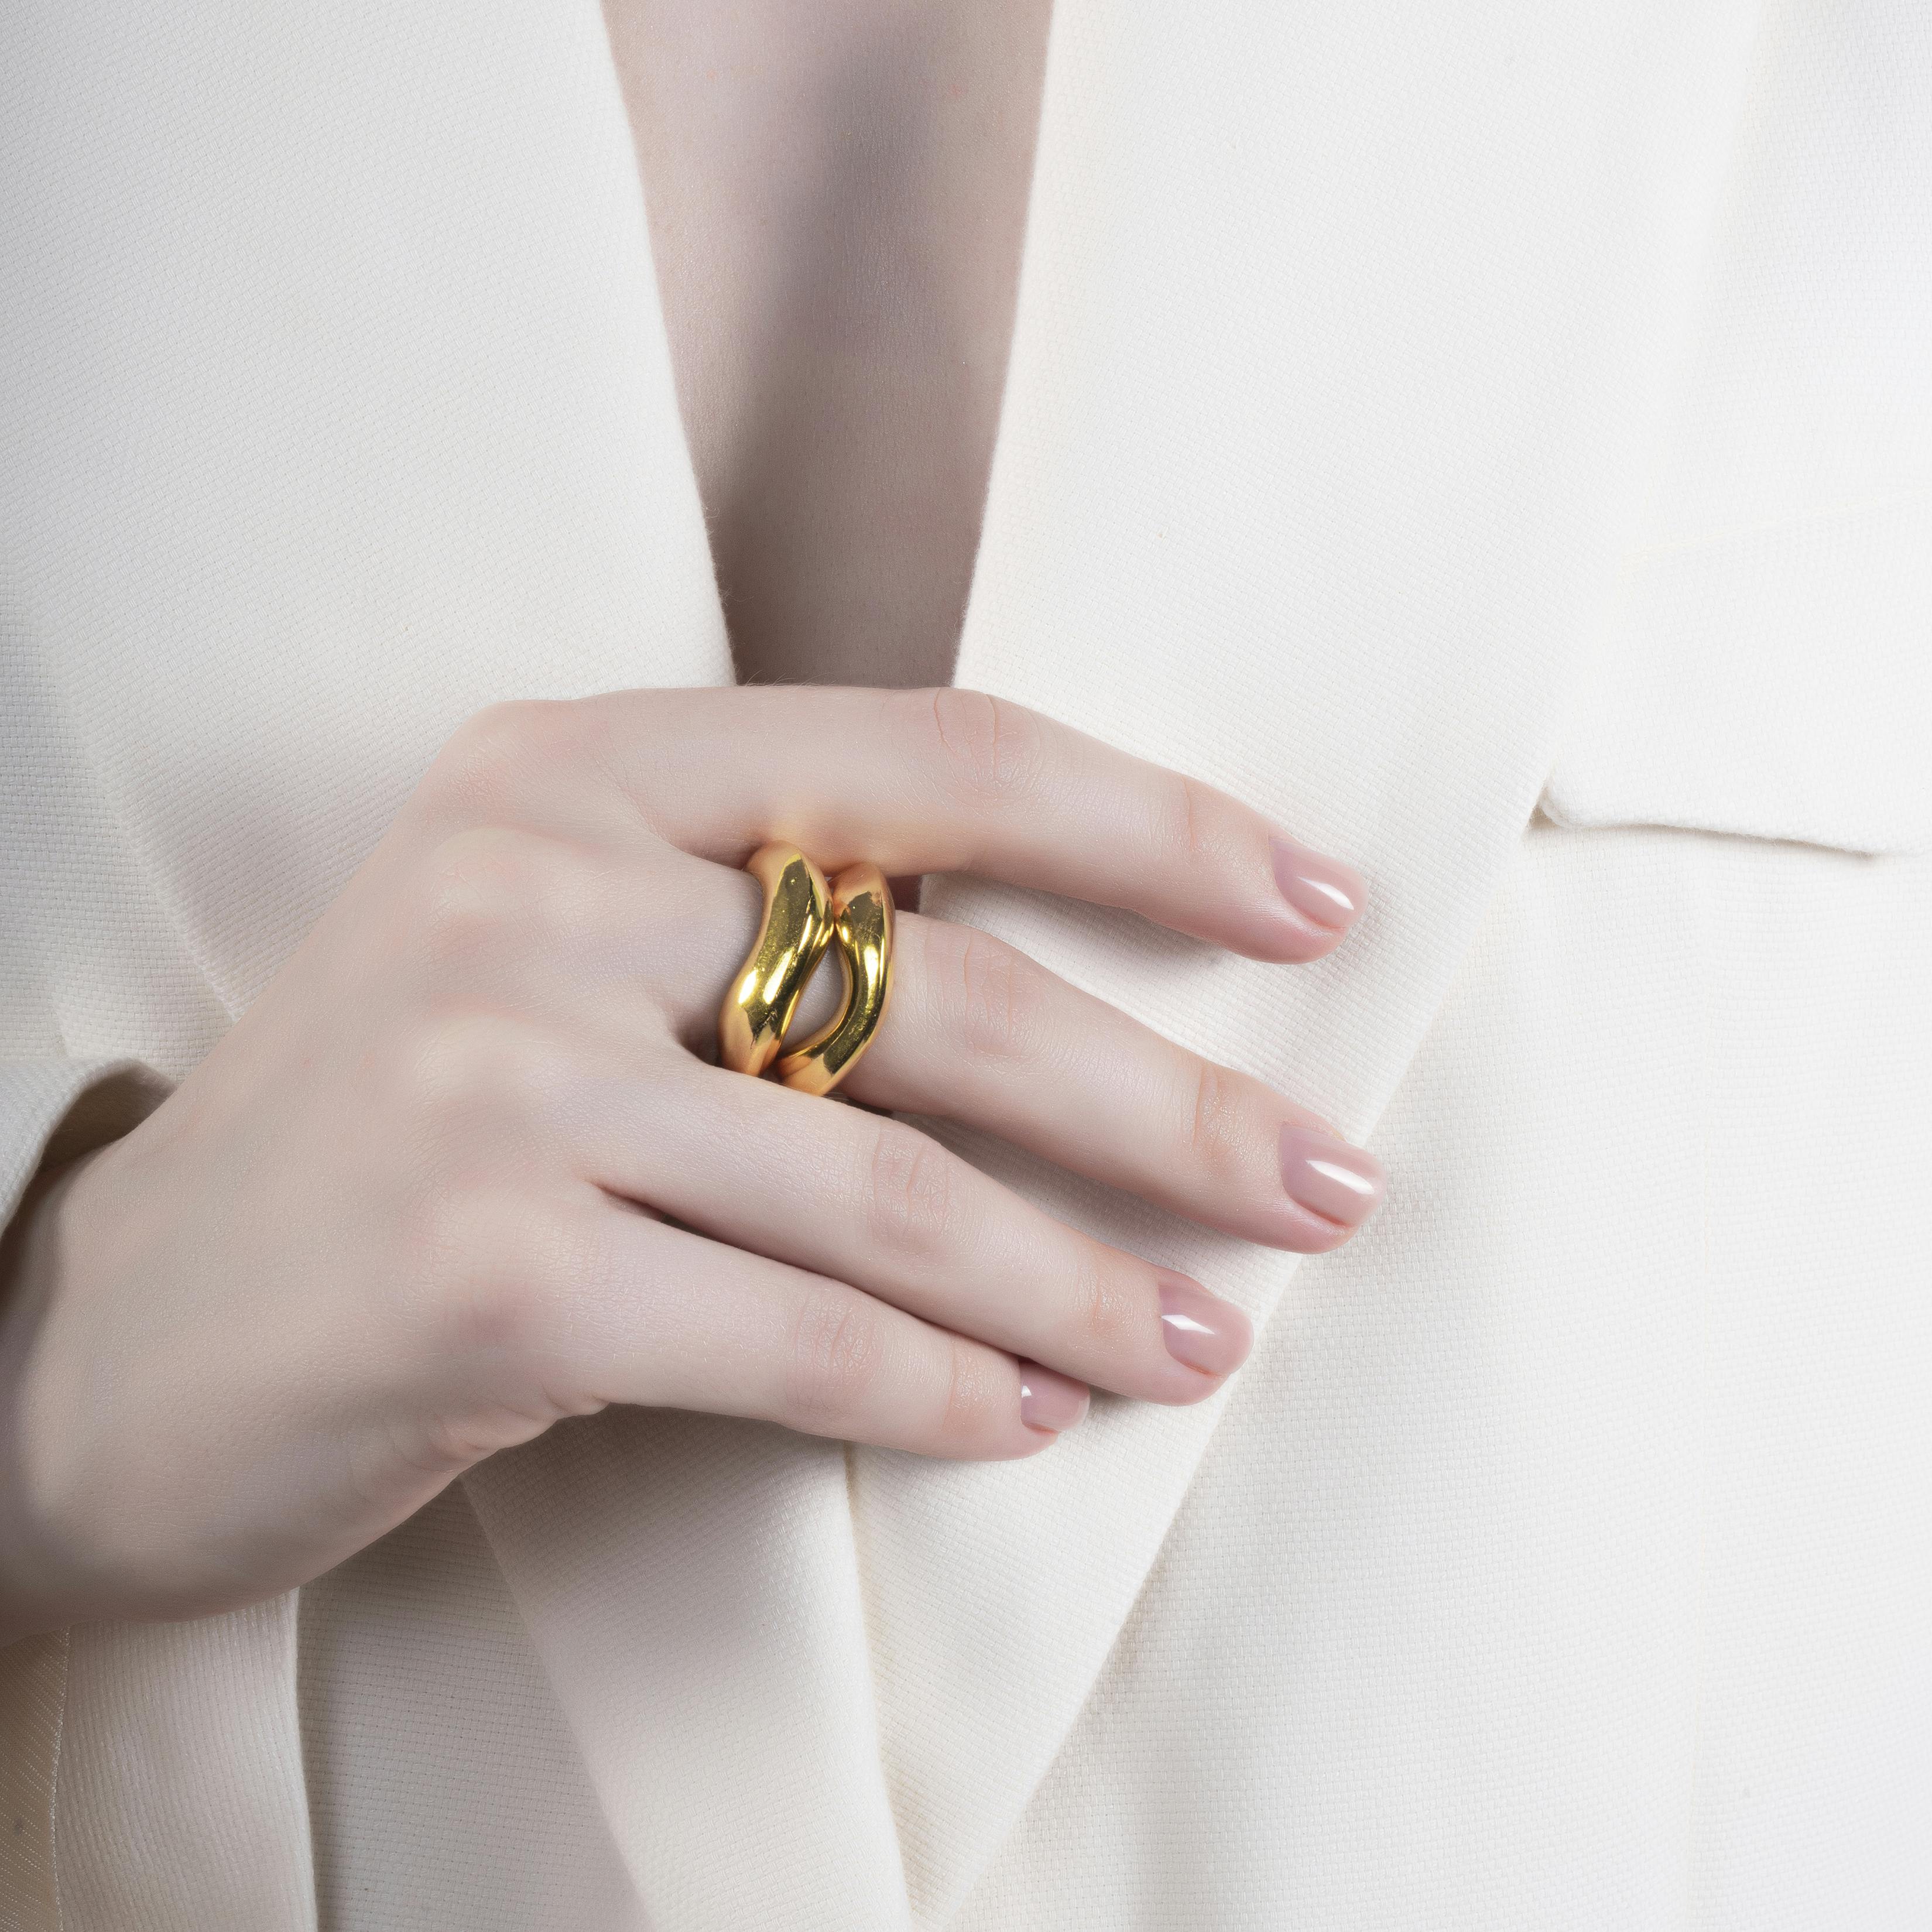 WAVE RING - GOLD TONE, a product by Equiivalence